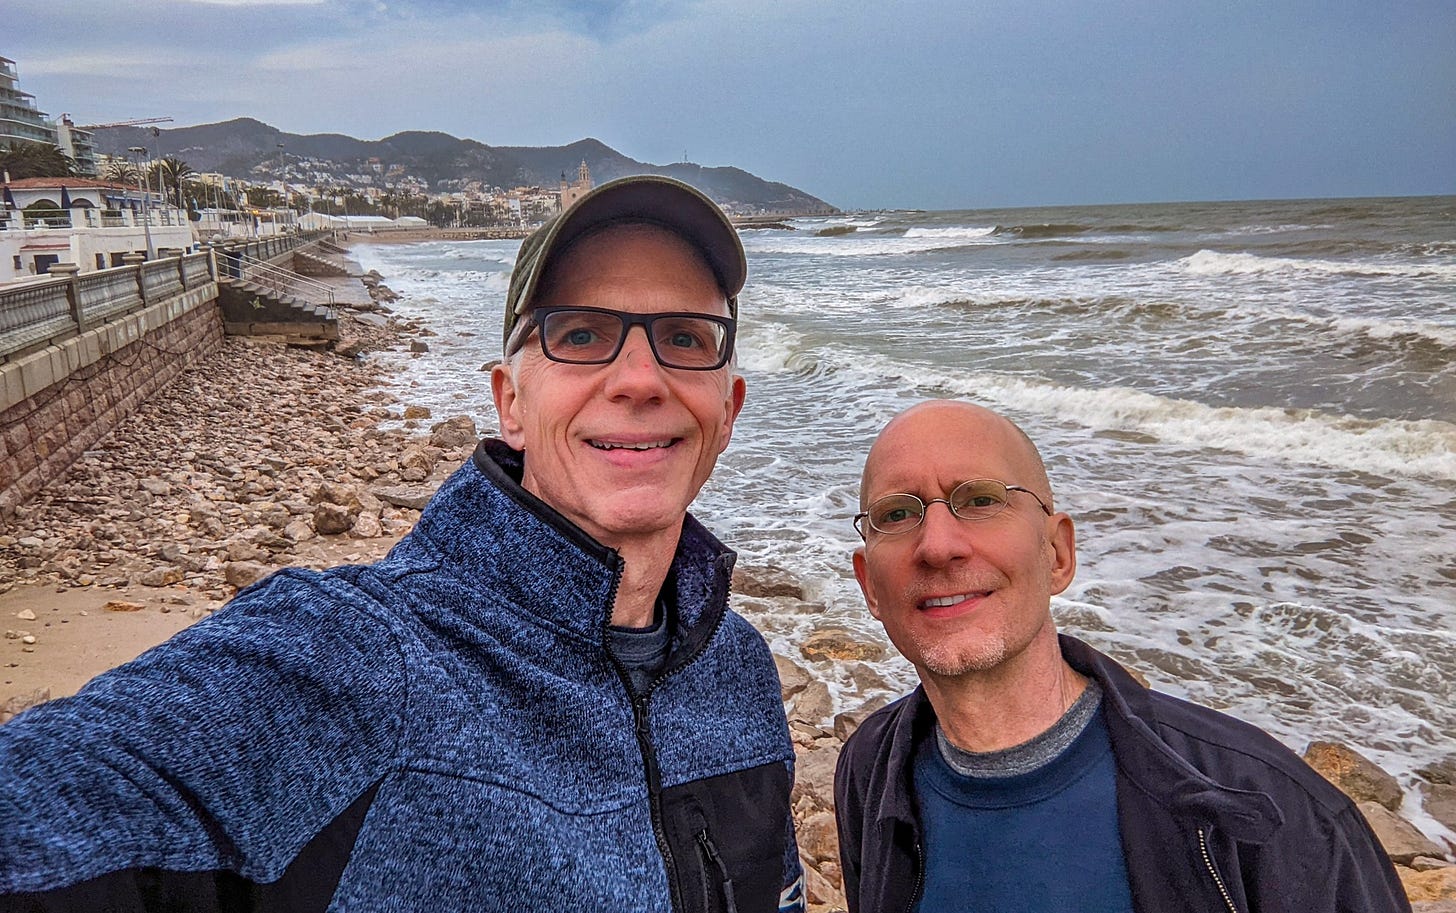 Michael and Brent standing on a rocky beach, the waves rolling in behind them under a grey sky. 